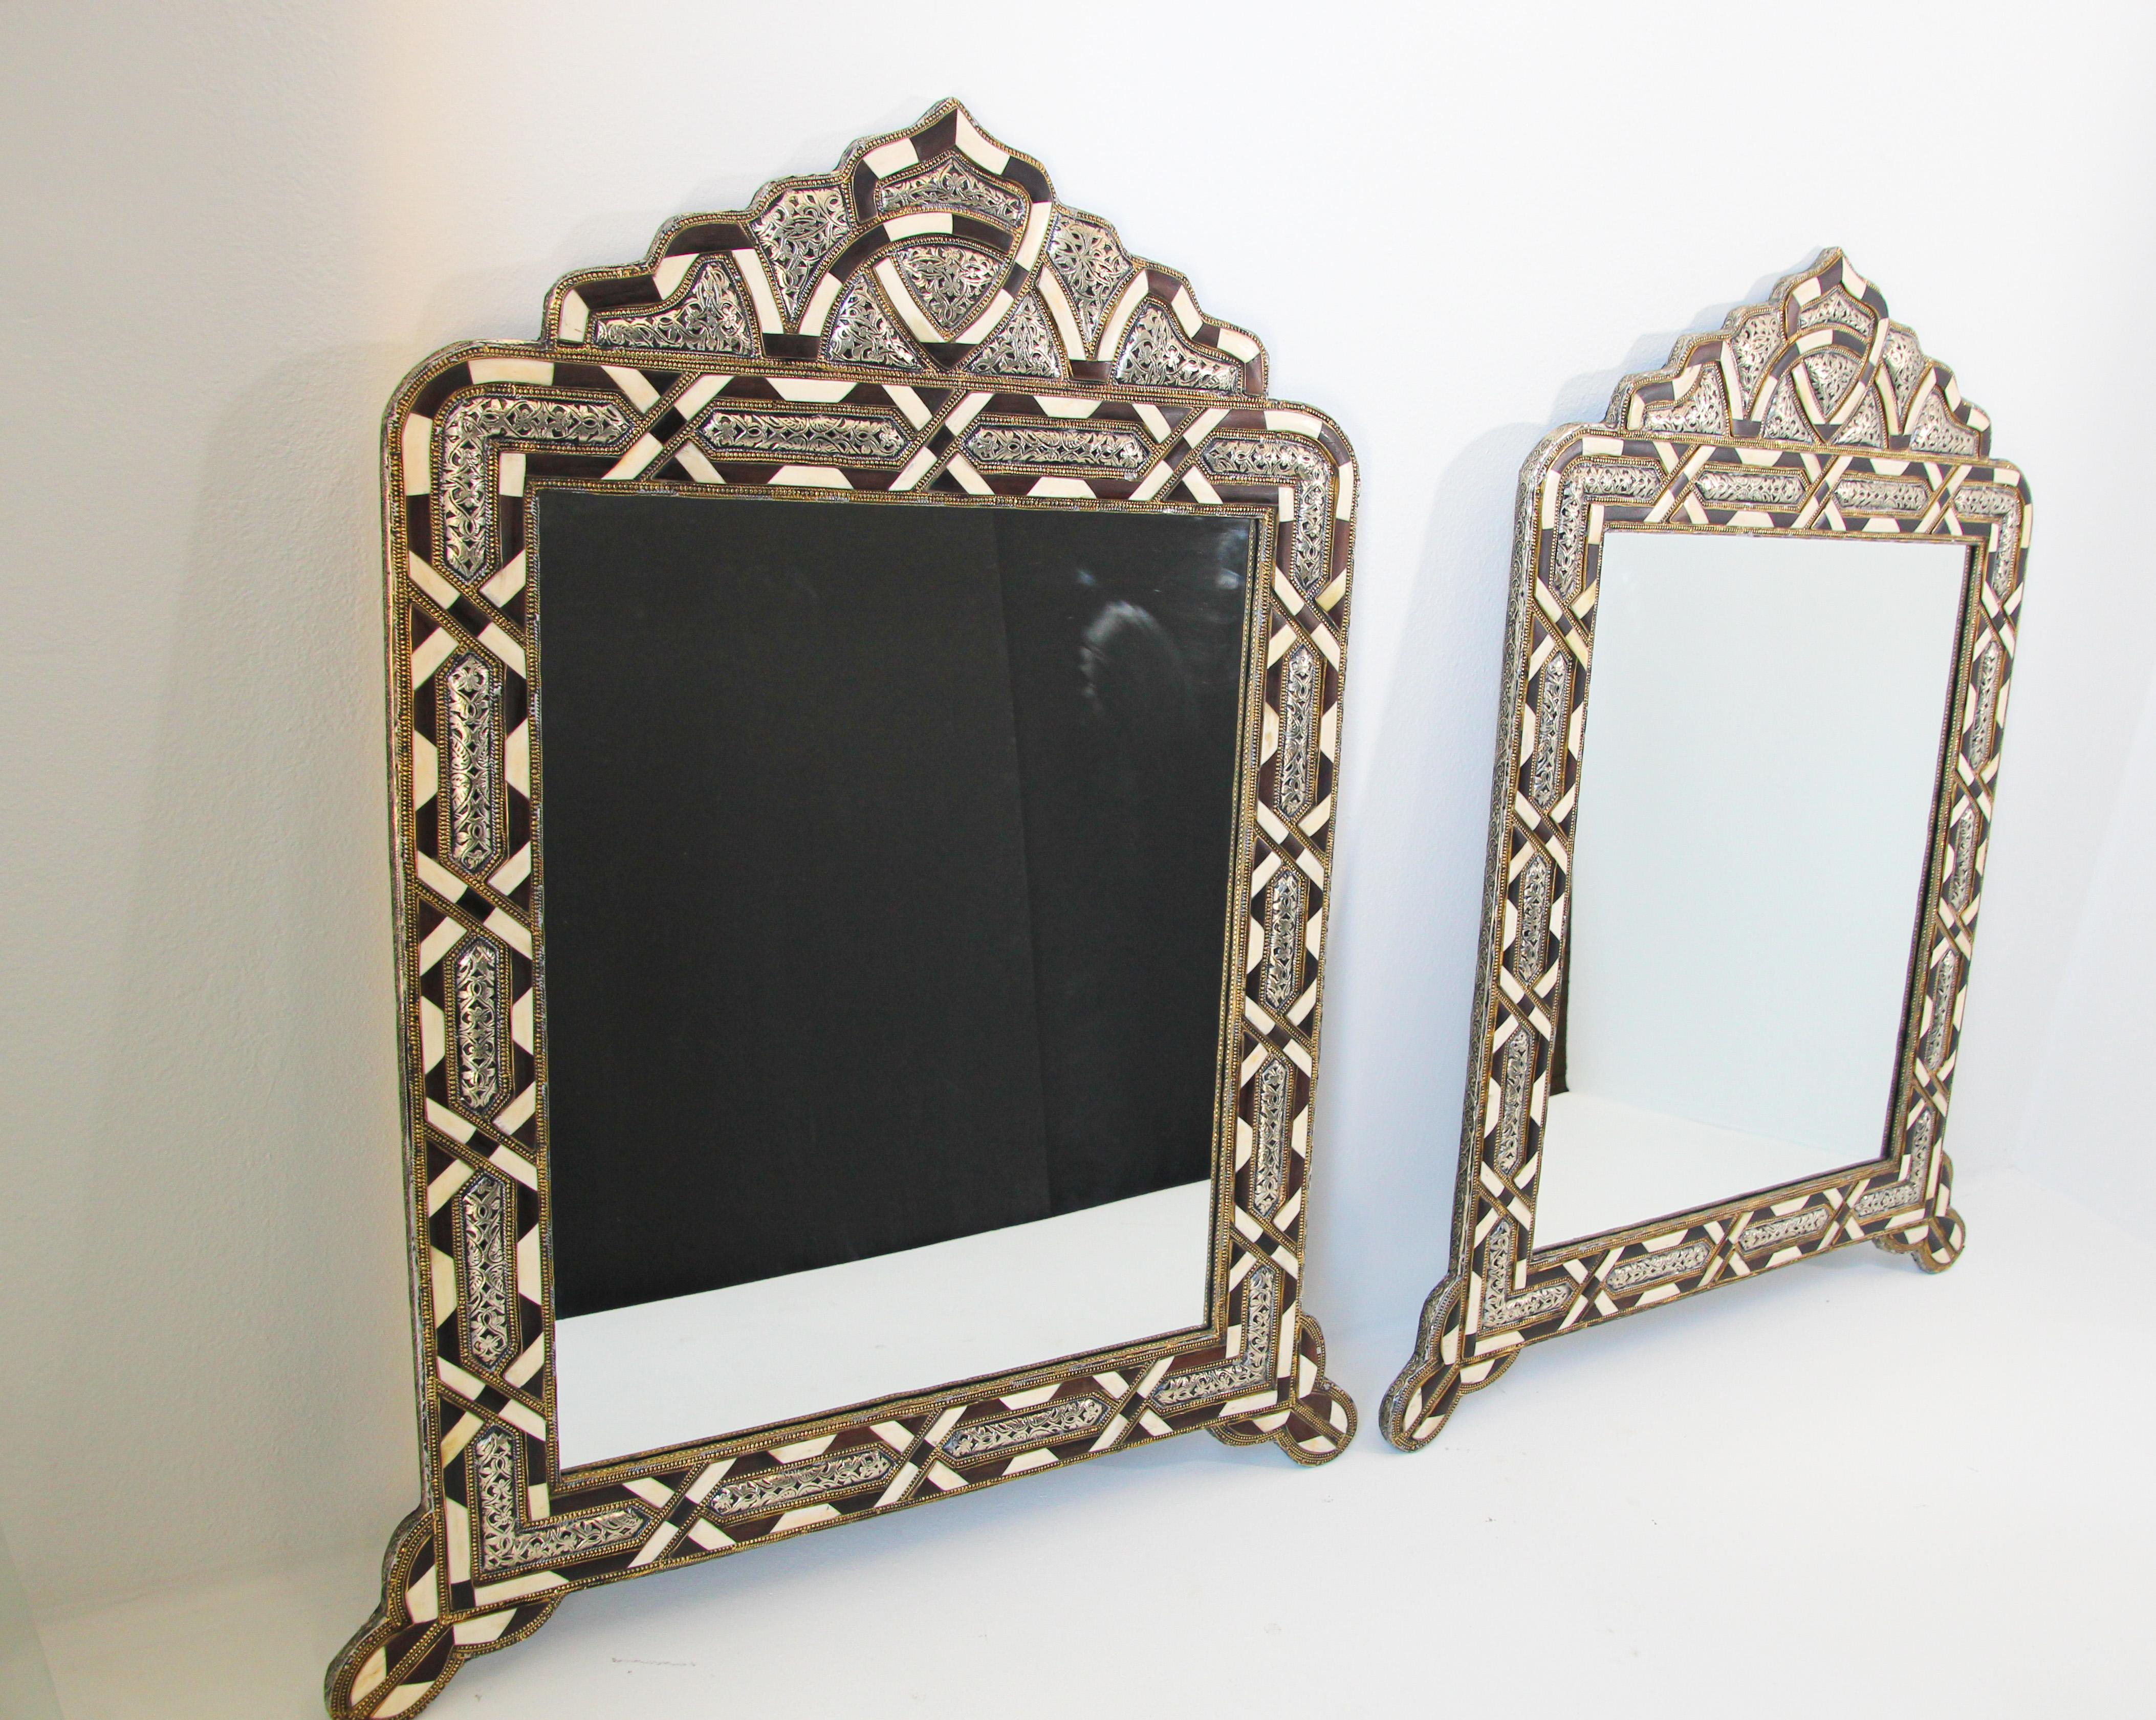 Pair of Handcrafted Bone Inlay Arched Moroccan Mirrors 13